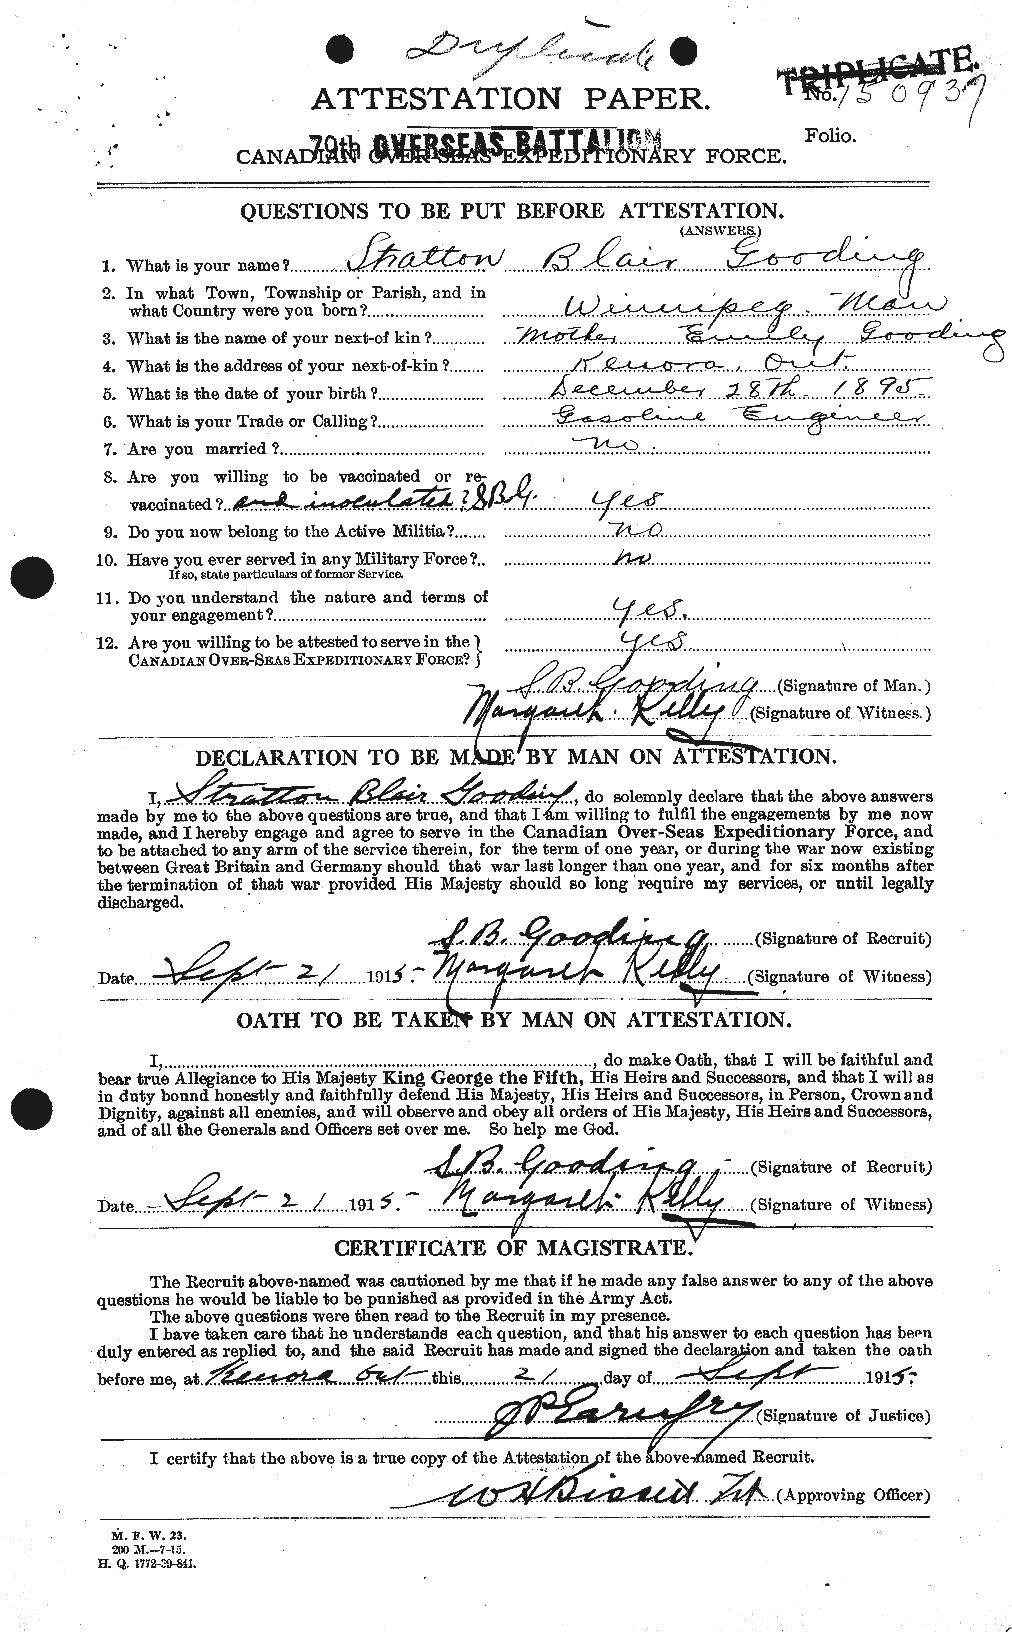 Personnel Records of the First World War - CEF 354766a